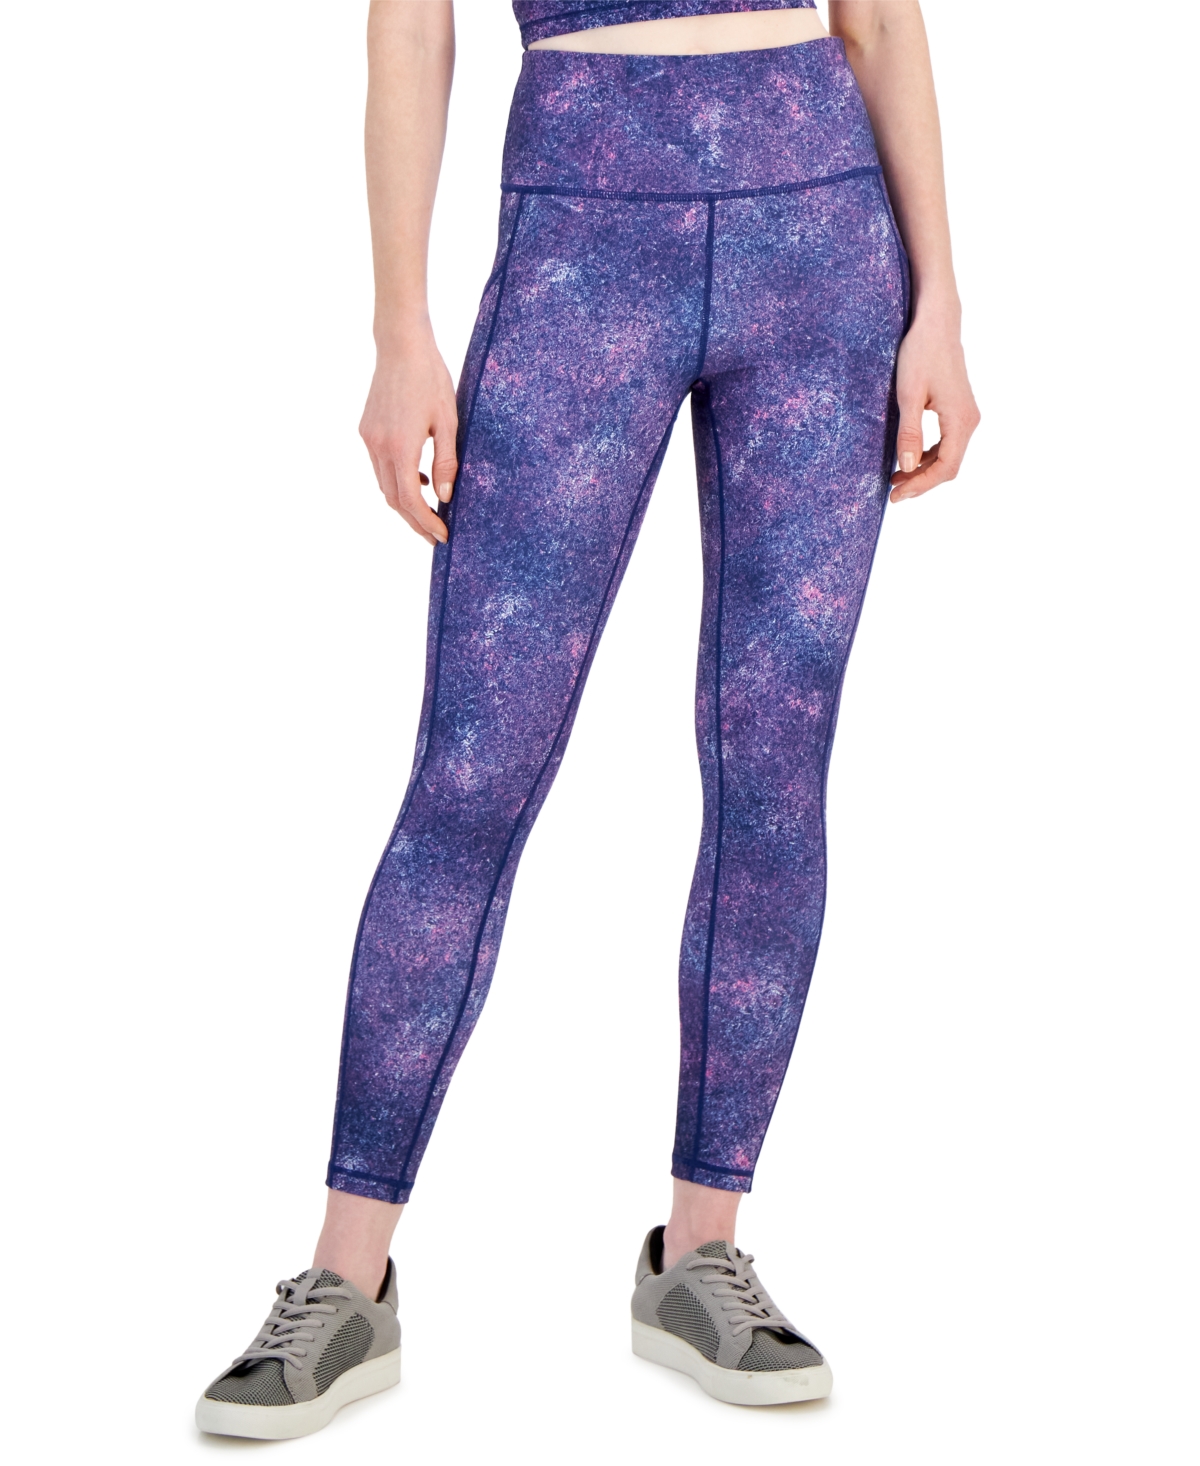 Women's Printed Side-Pocket Leggings, Created for Macy's - Berry Patch